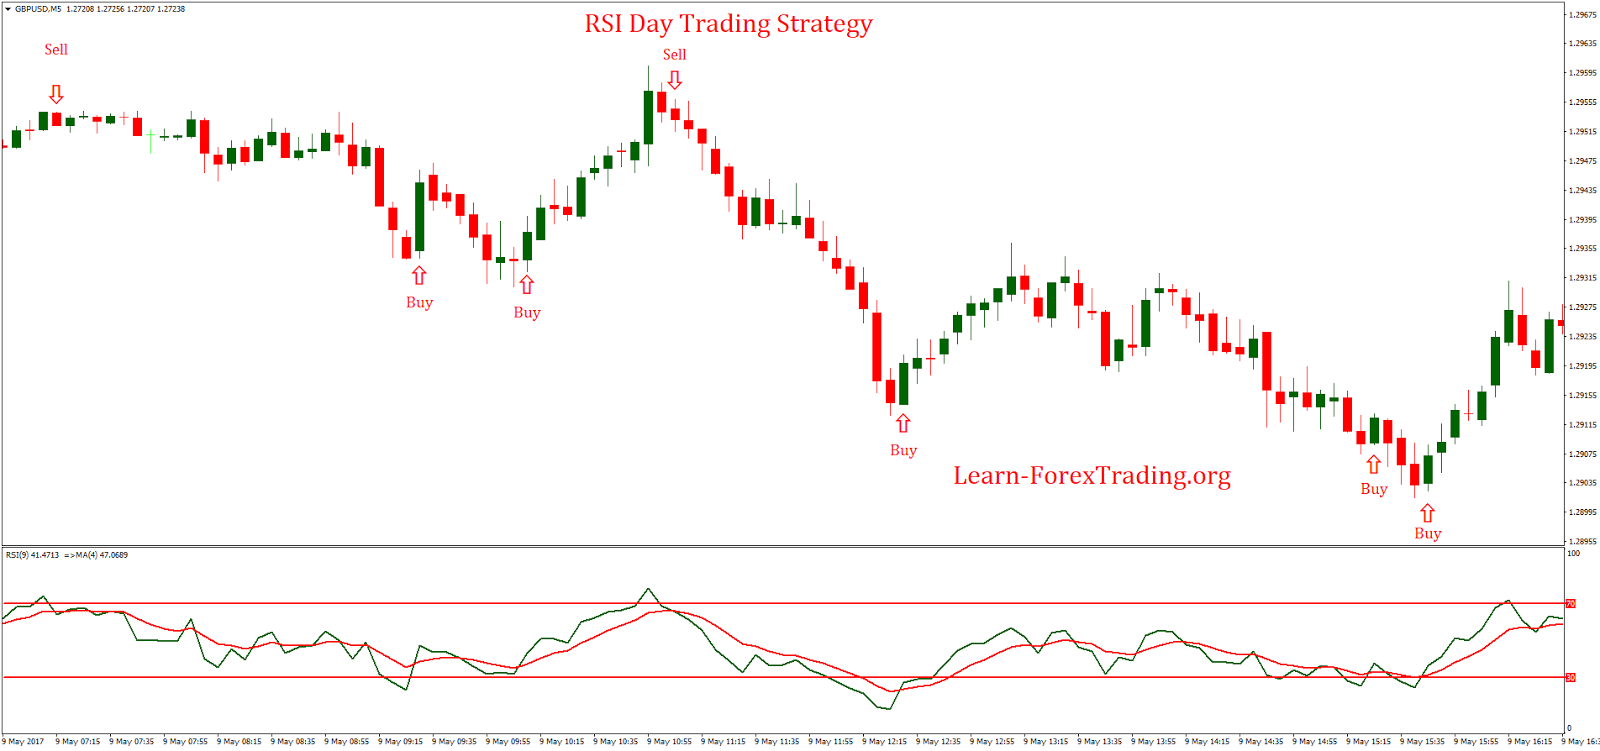 5 day rsi strategy